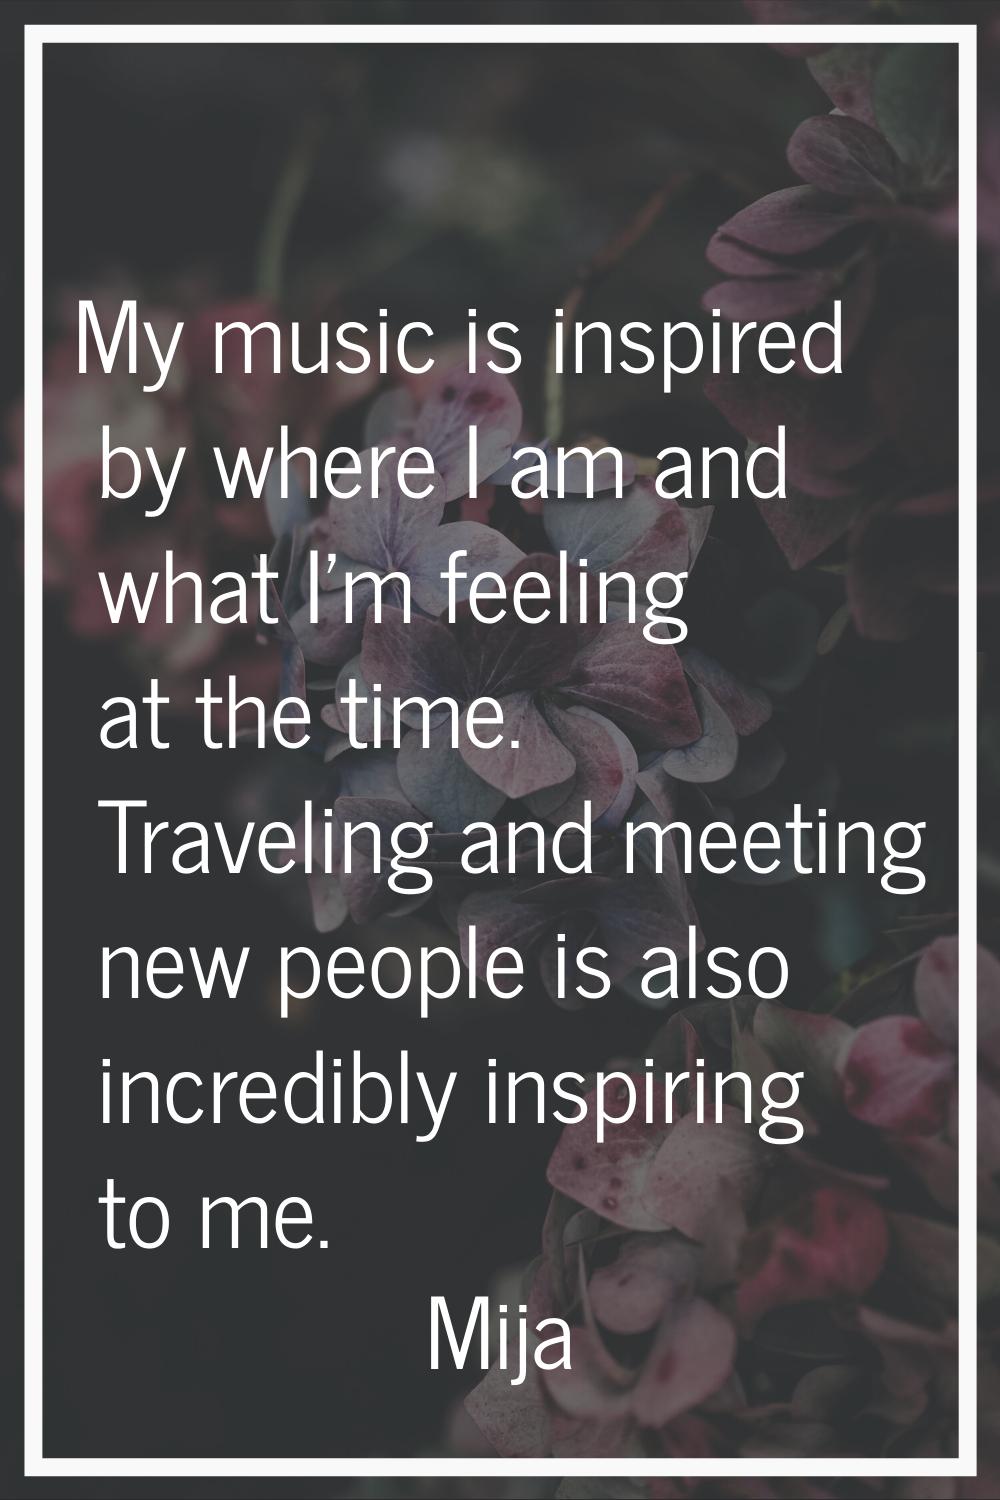 My music is inspired by where I am and what I'm feeling at the time. Traveling and meeting new peop